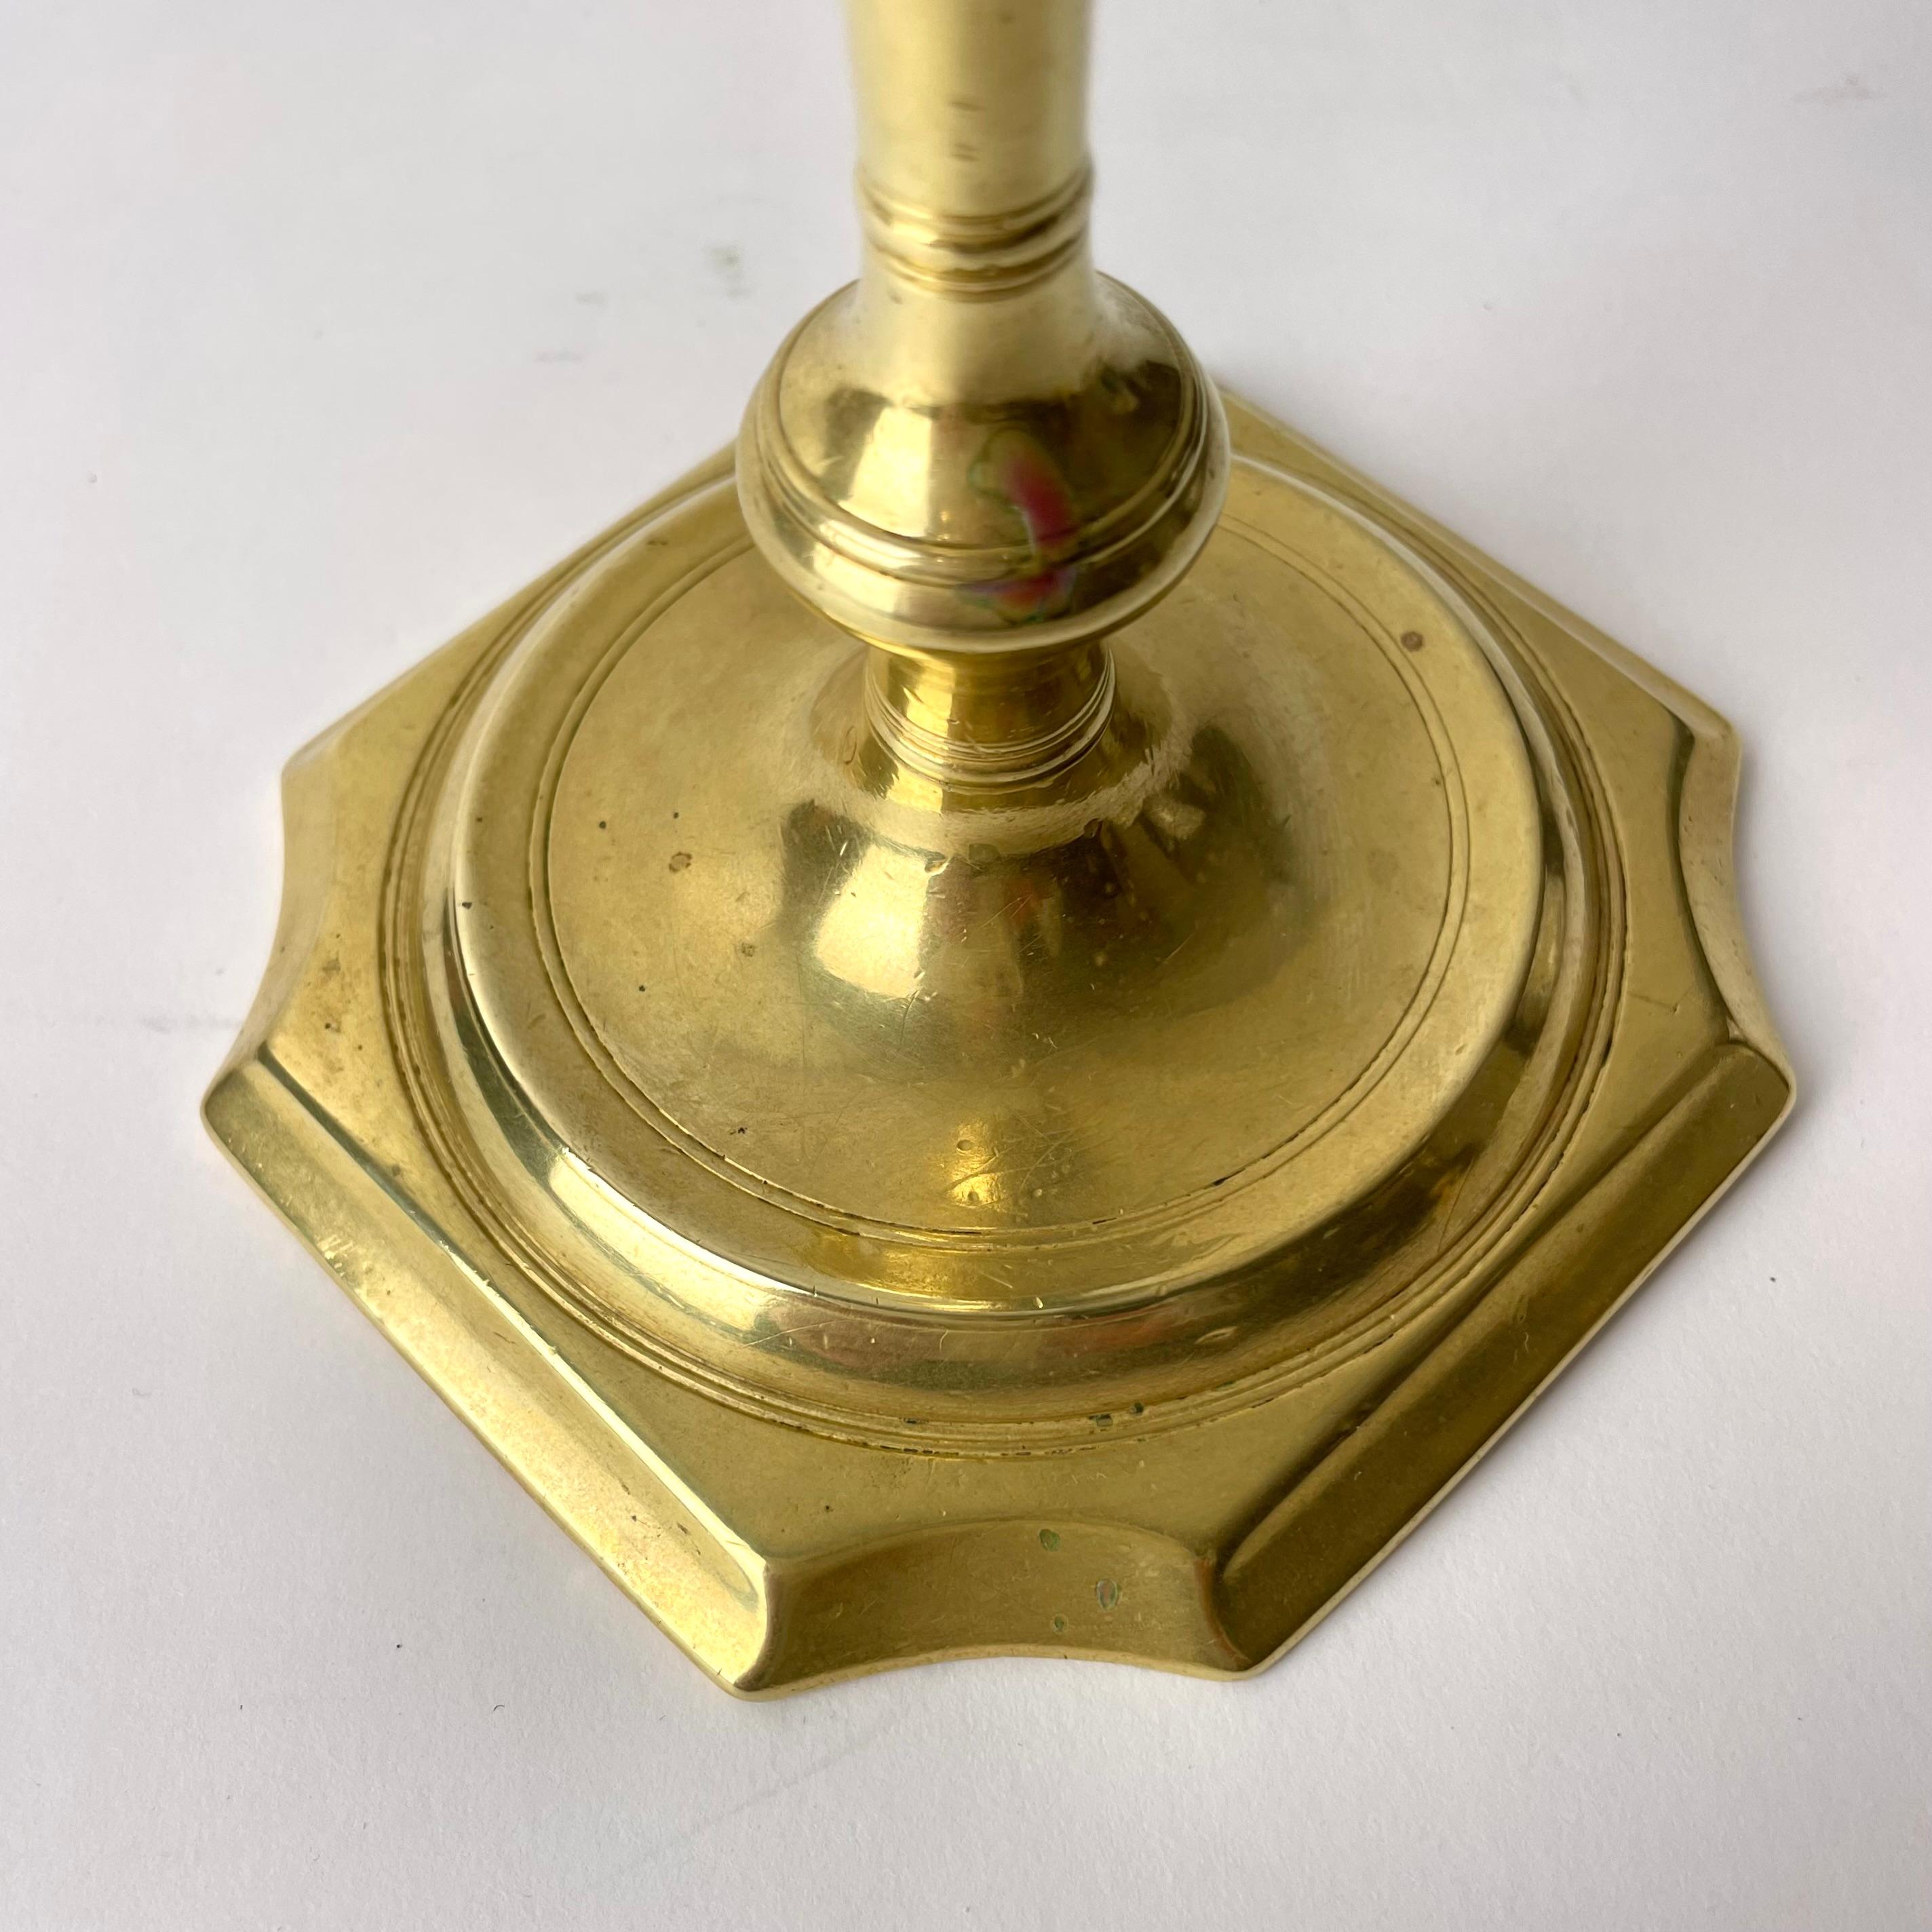 A Brass Candlestick in Swedish Baroque, early 18th Century For Sale 2